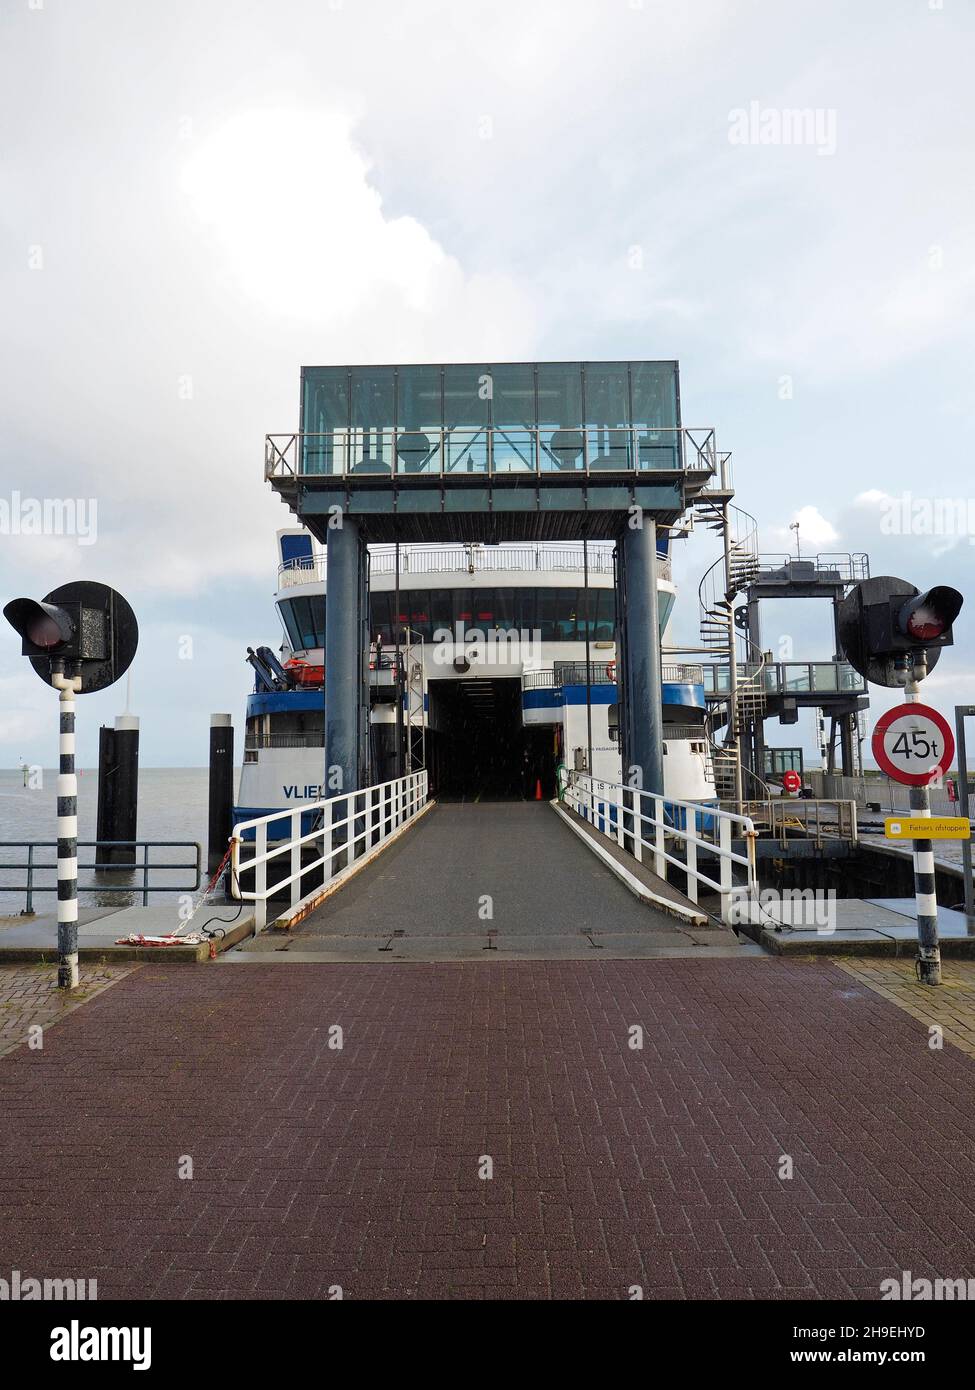 The car ramp of the Ferry from Vlieland island to Harlingen, Friesland, the Netherlands. The trip over the shallow Wadden sea takes about 90 minutes. Stock Photo